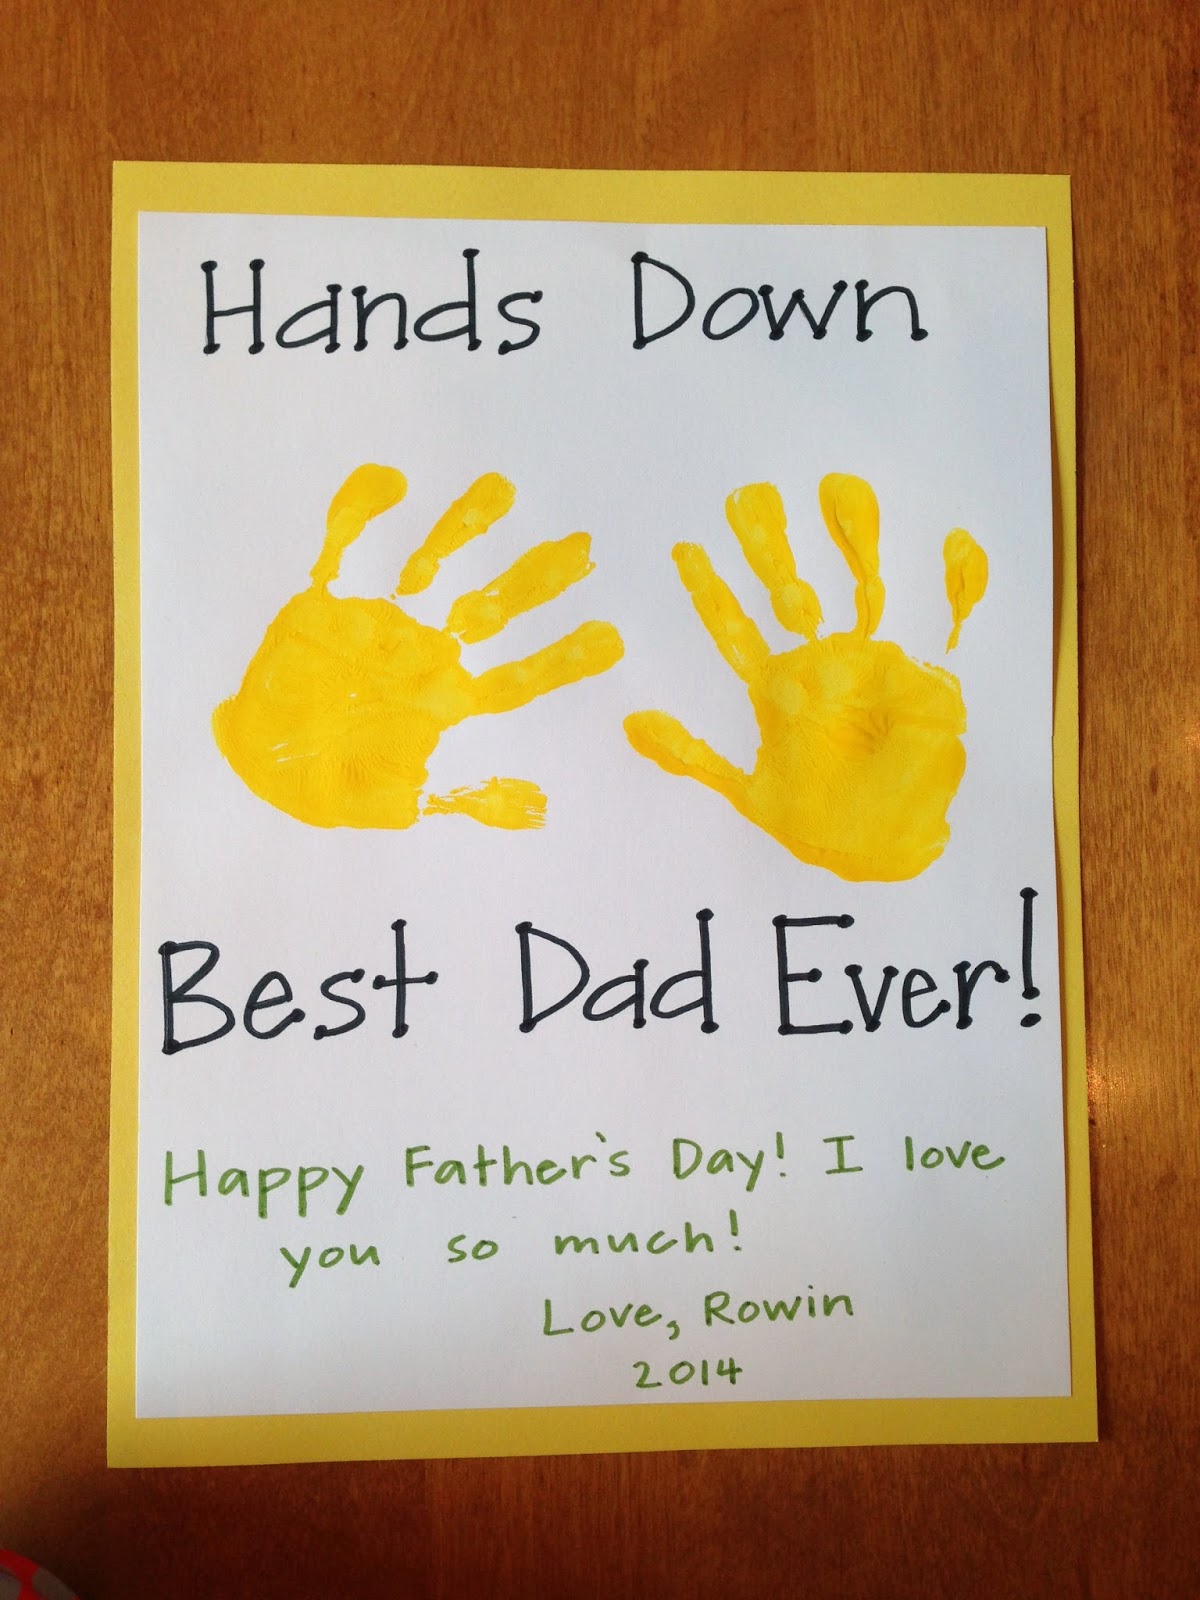 Download Teach. Play. Love.: Easy Homemade Father's Day Card